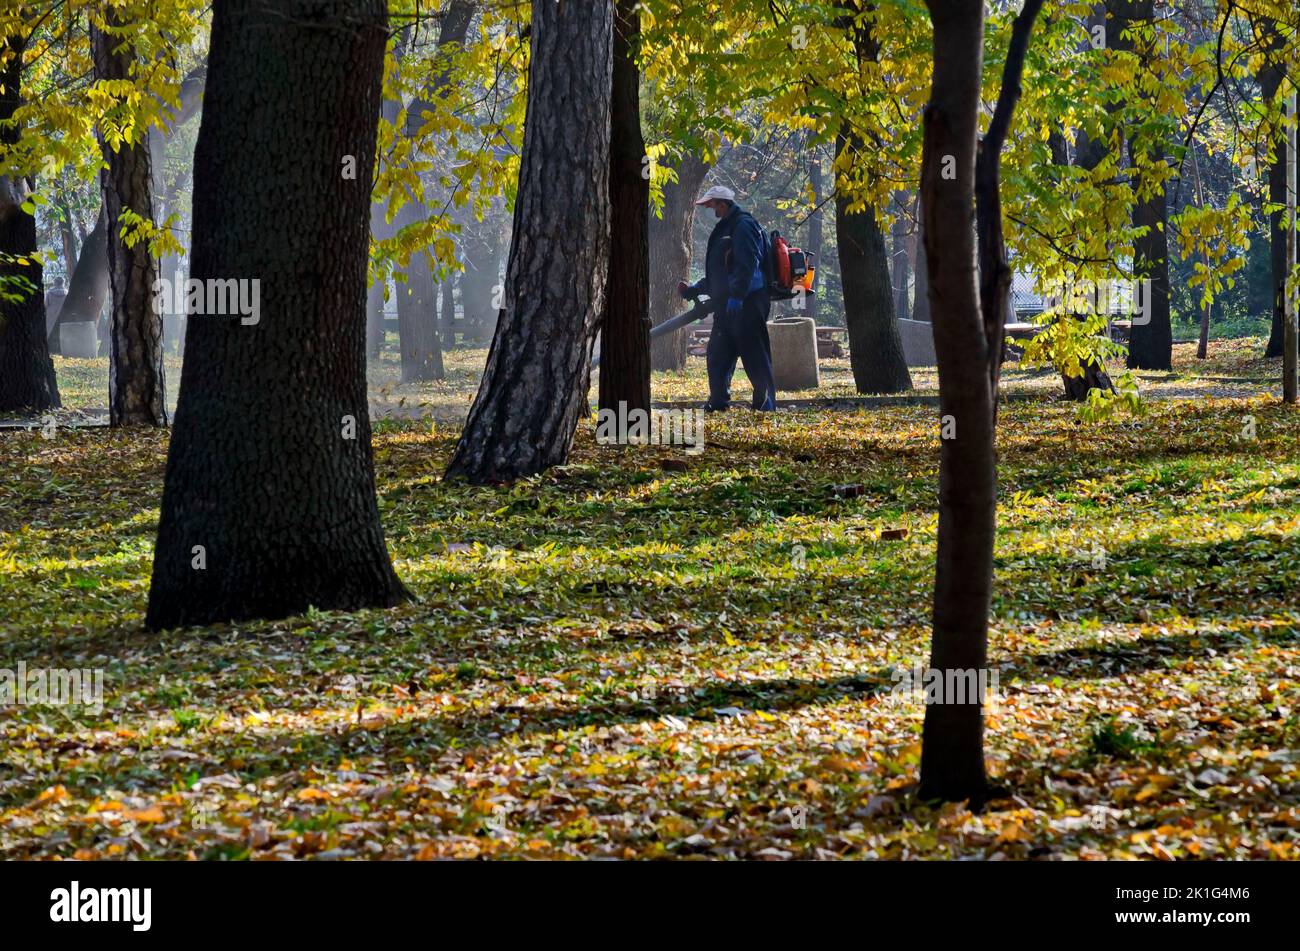 A worker with a blower cleans a city park of fallen autumn leaves, Sofia, Bulgaria Stock Photo